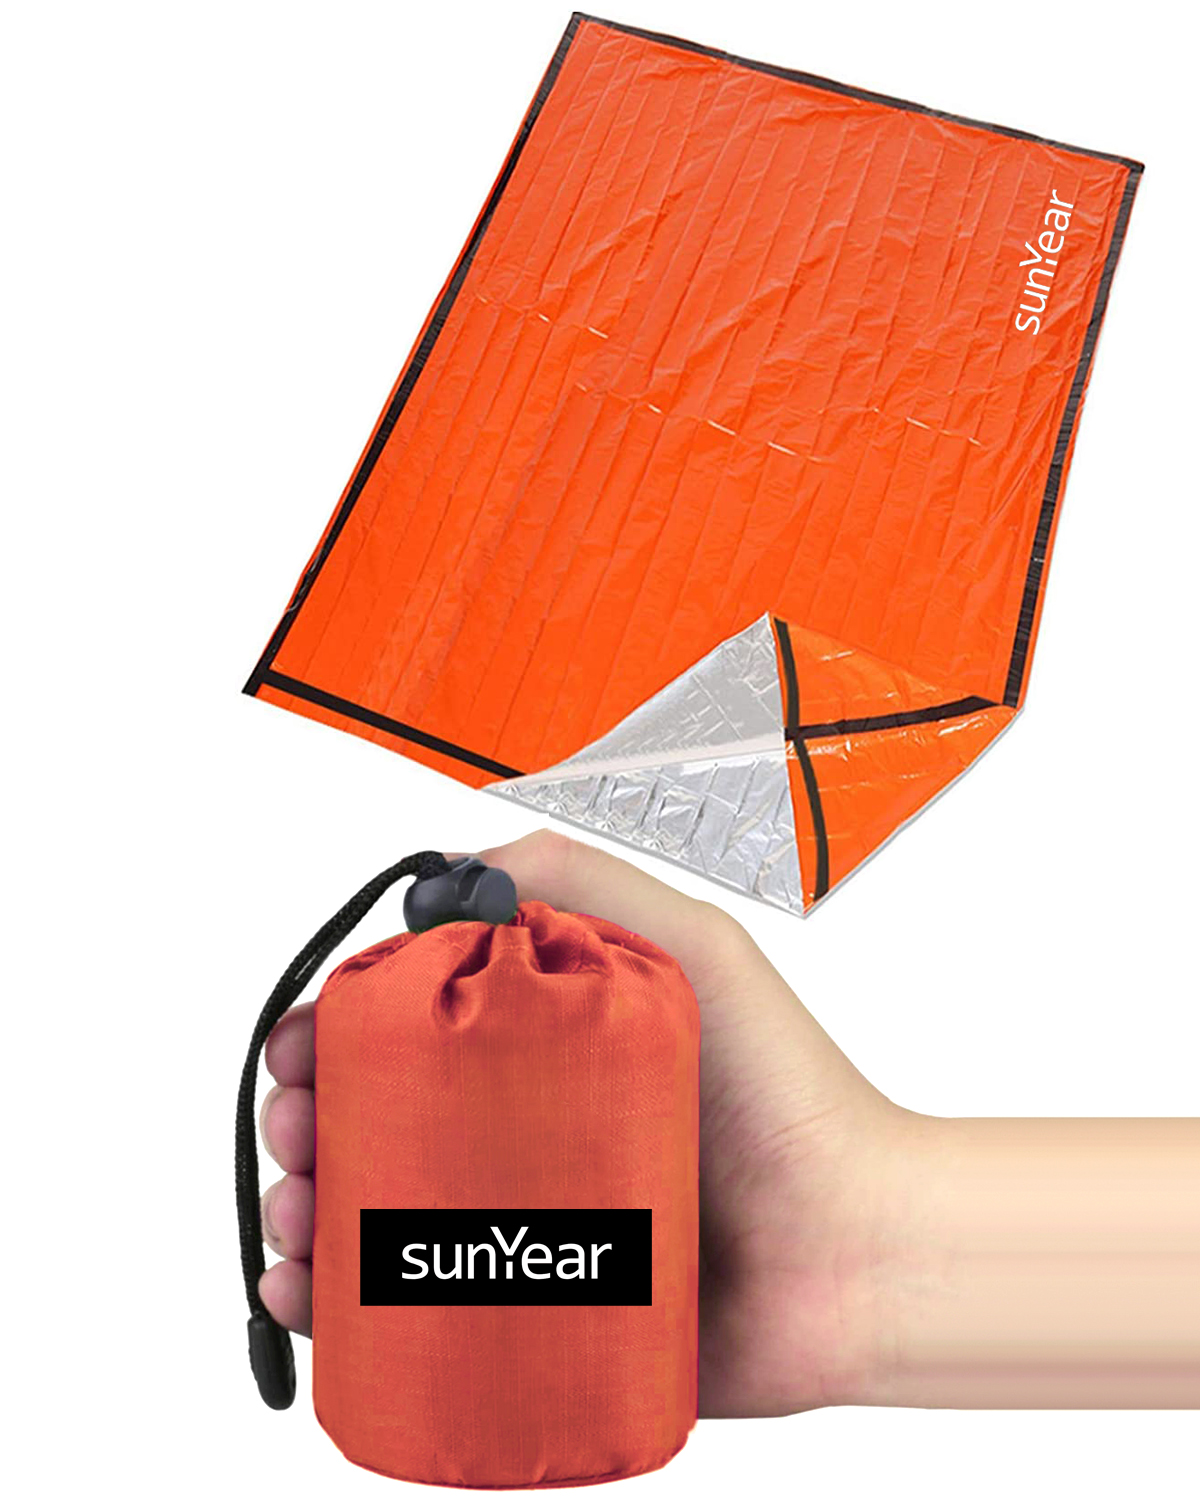 US$ 29.99 - Sunyear Survival Tent, Emergency Tent Survival Shelter